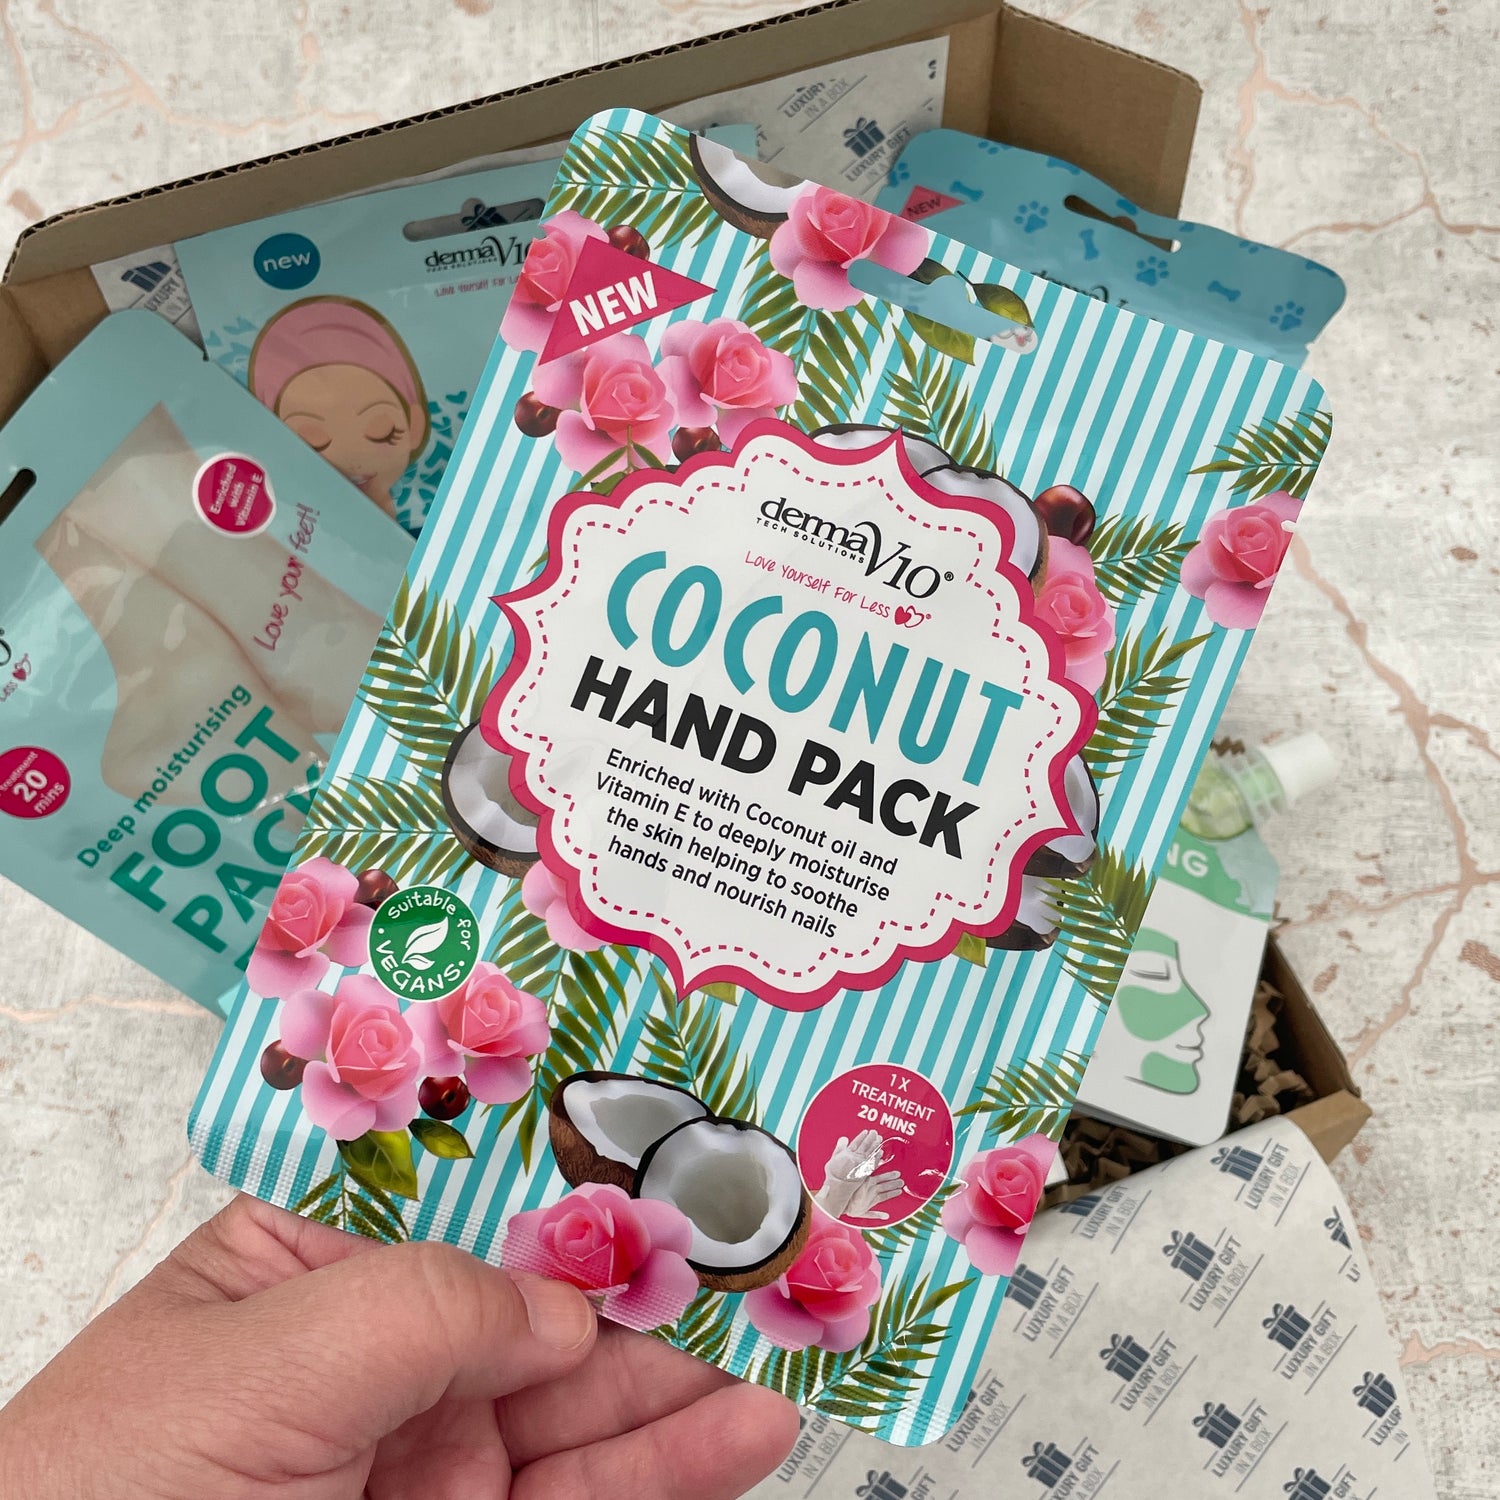 Coconut Hand Pack with Vitamin E